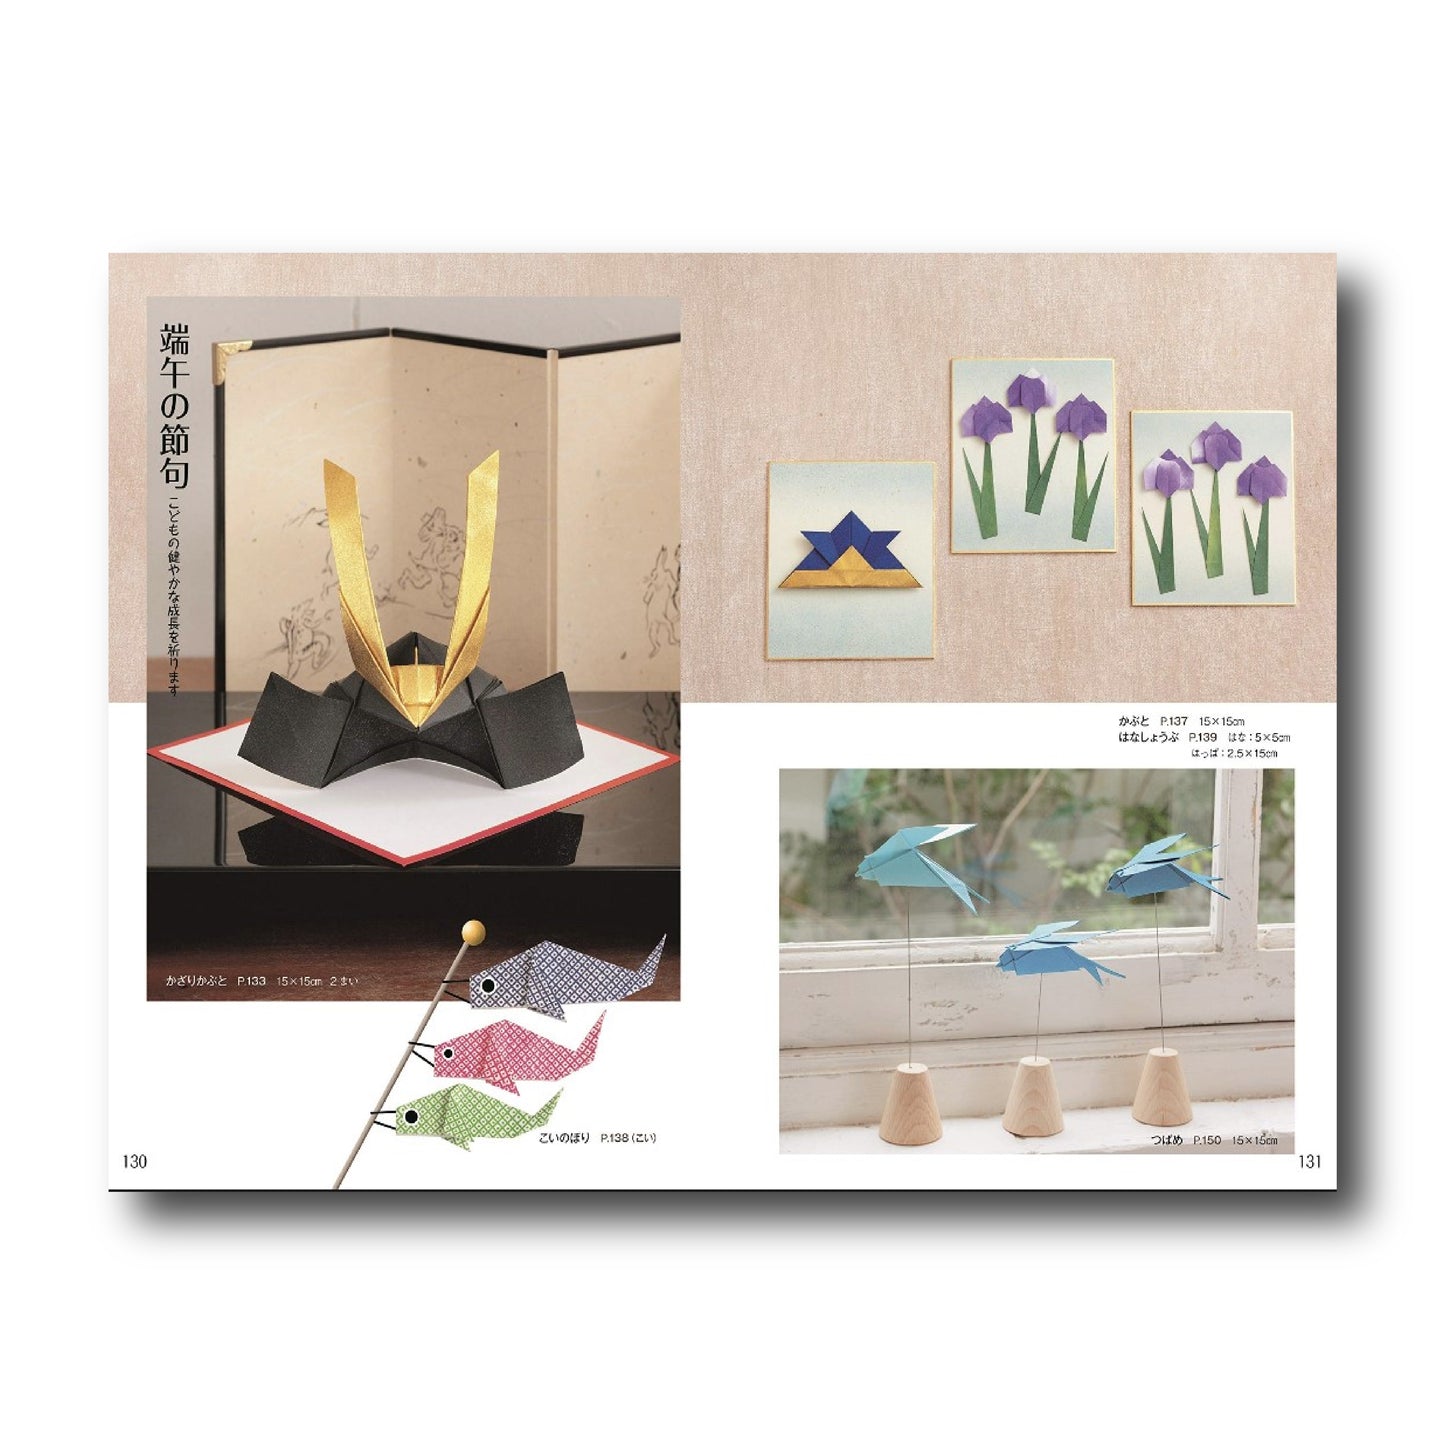 Definitive Edition! Japanese Origami: 12 Months (Japanese Edition)